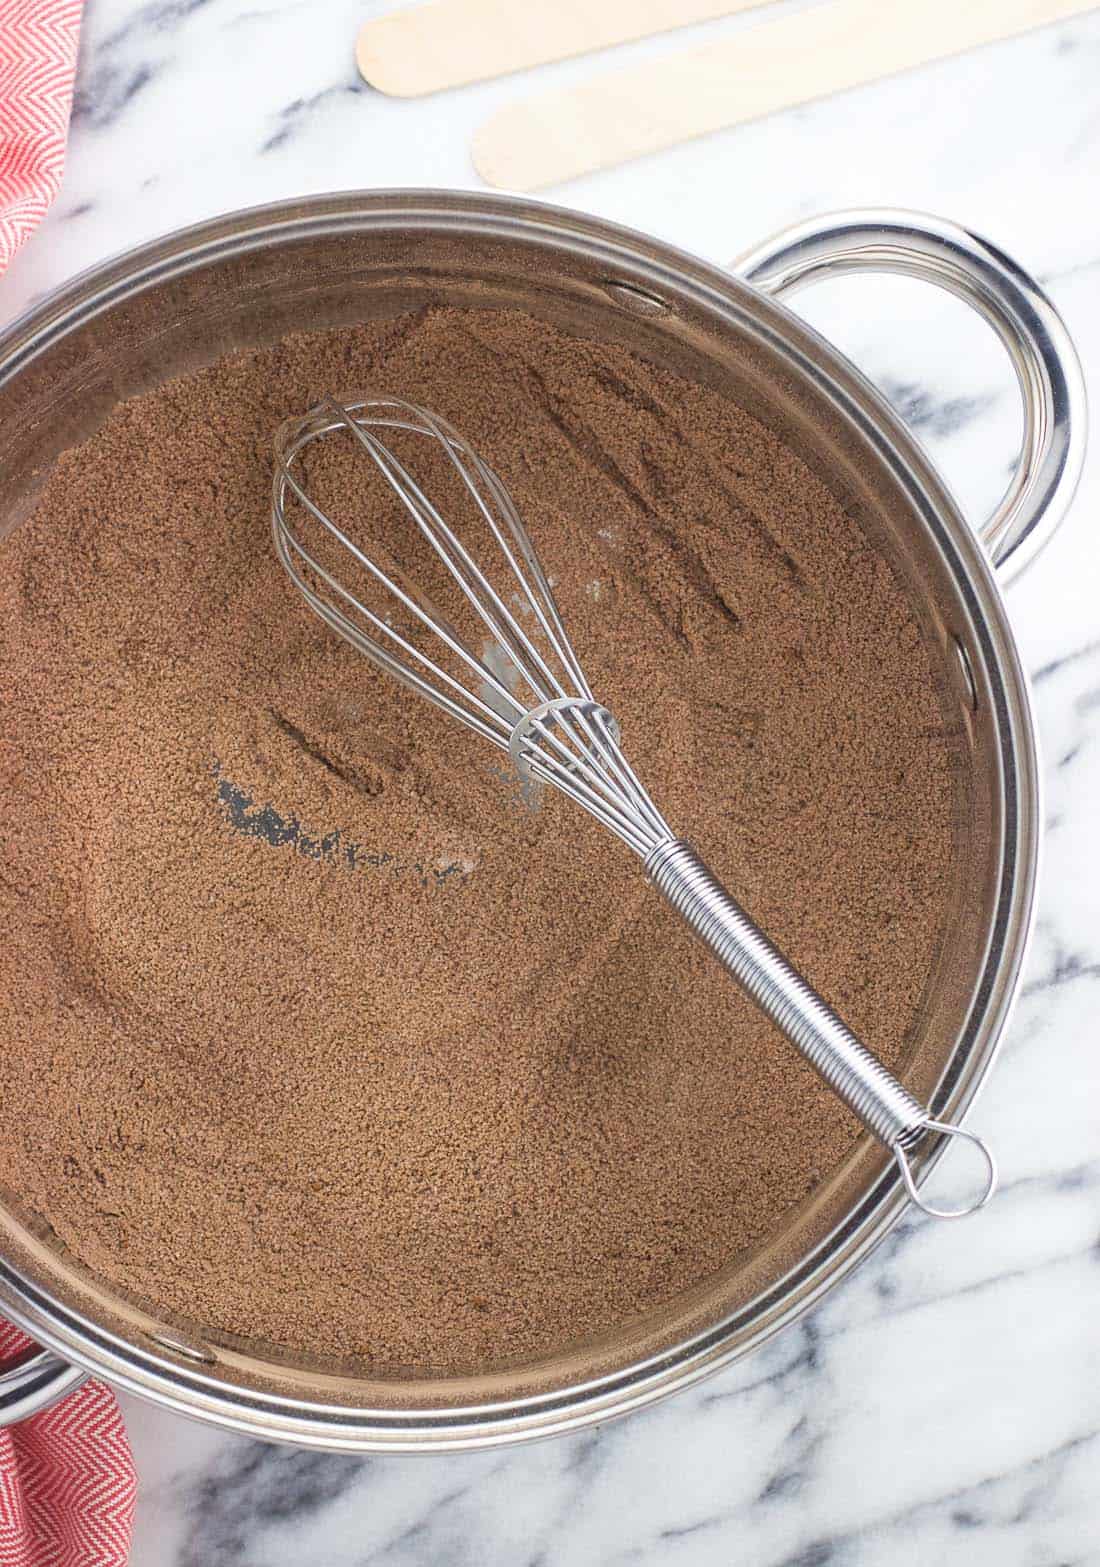 Sugar, cocoa powder, and cornstarch stirred together in a medium saucepan with a metal whisk